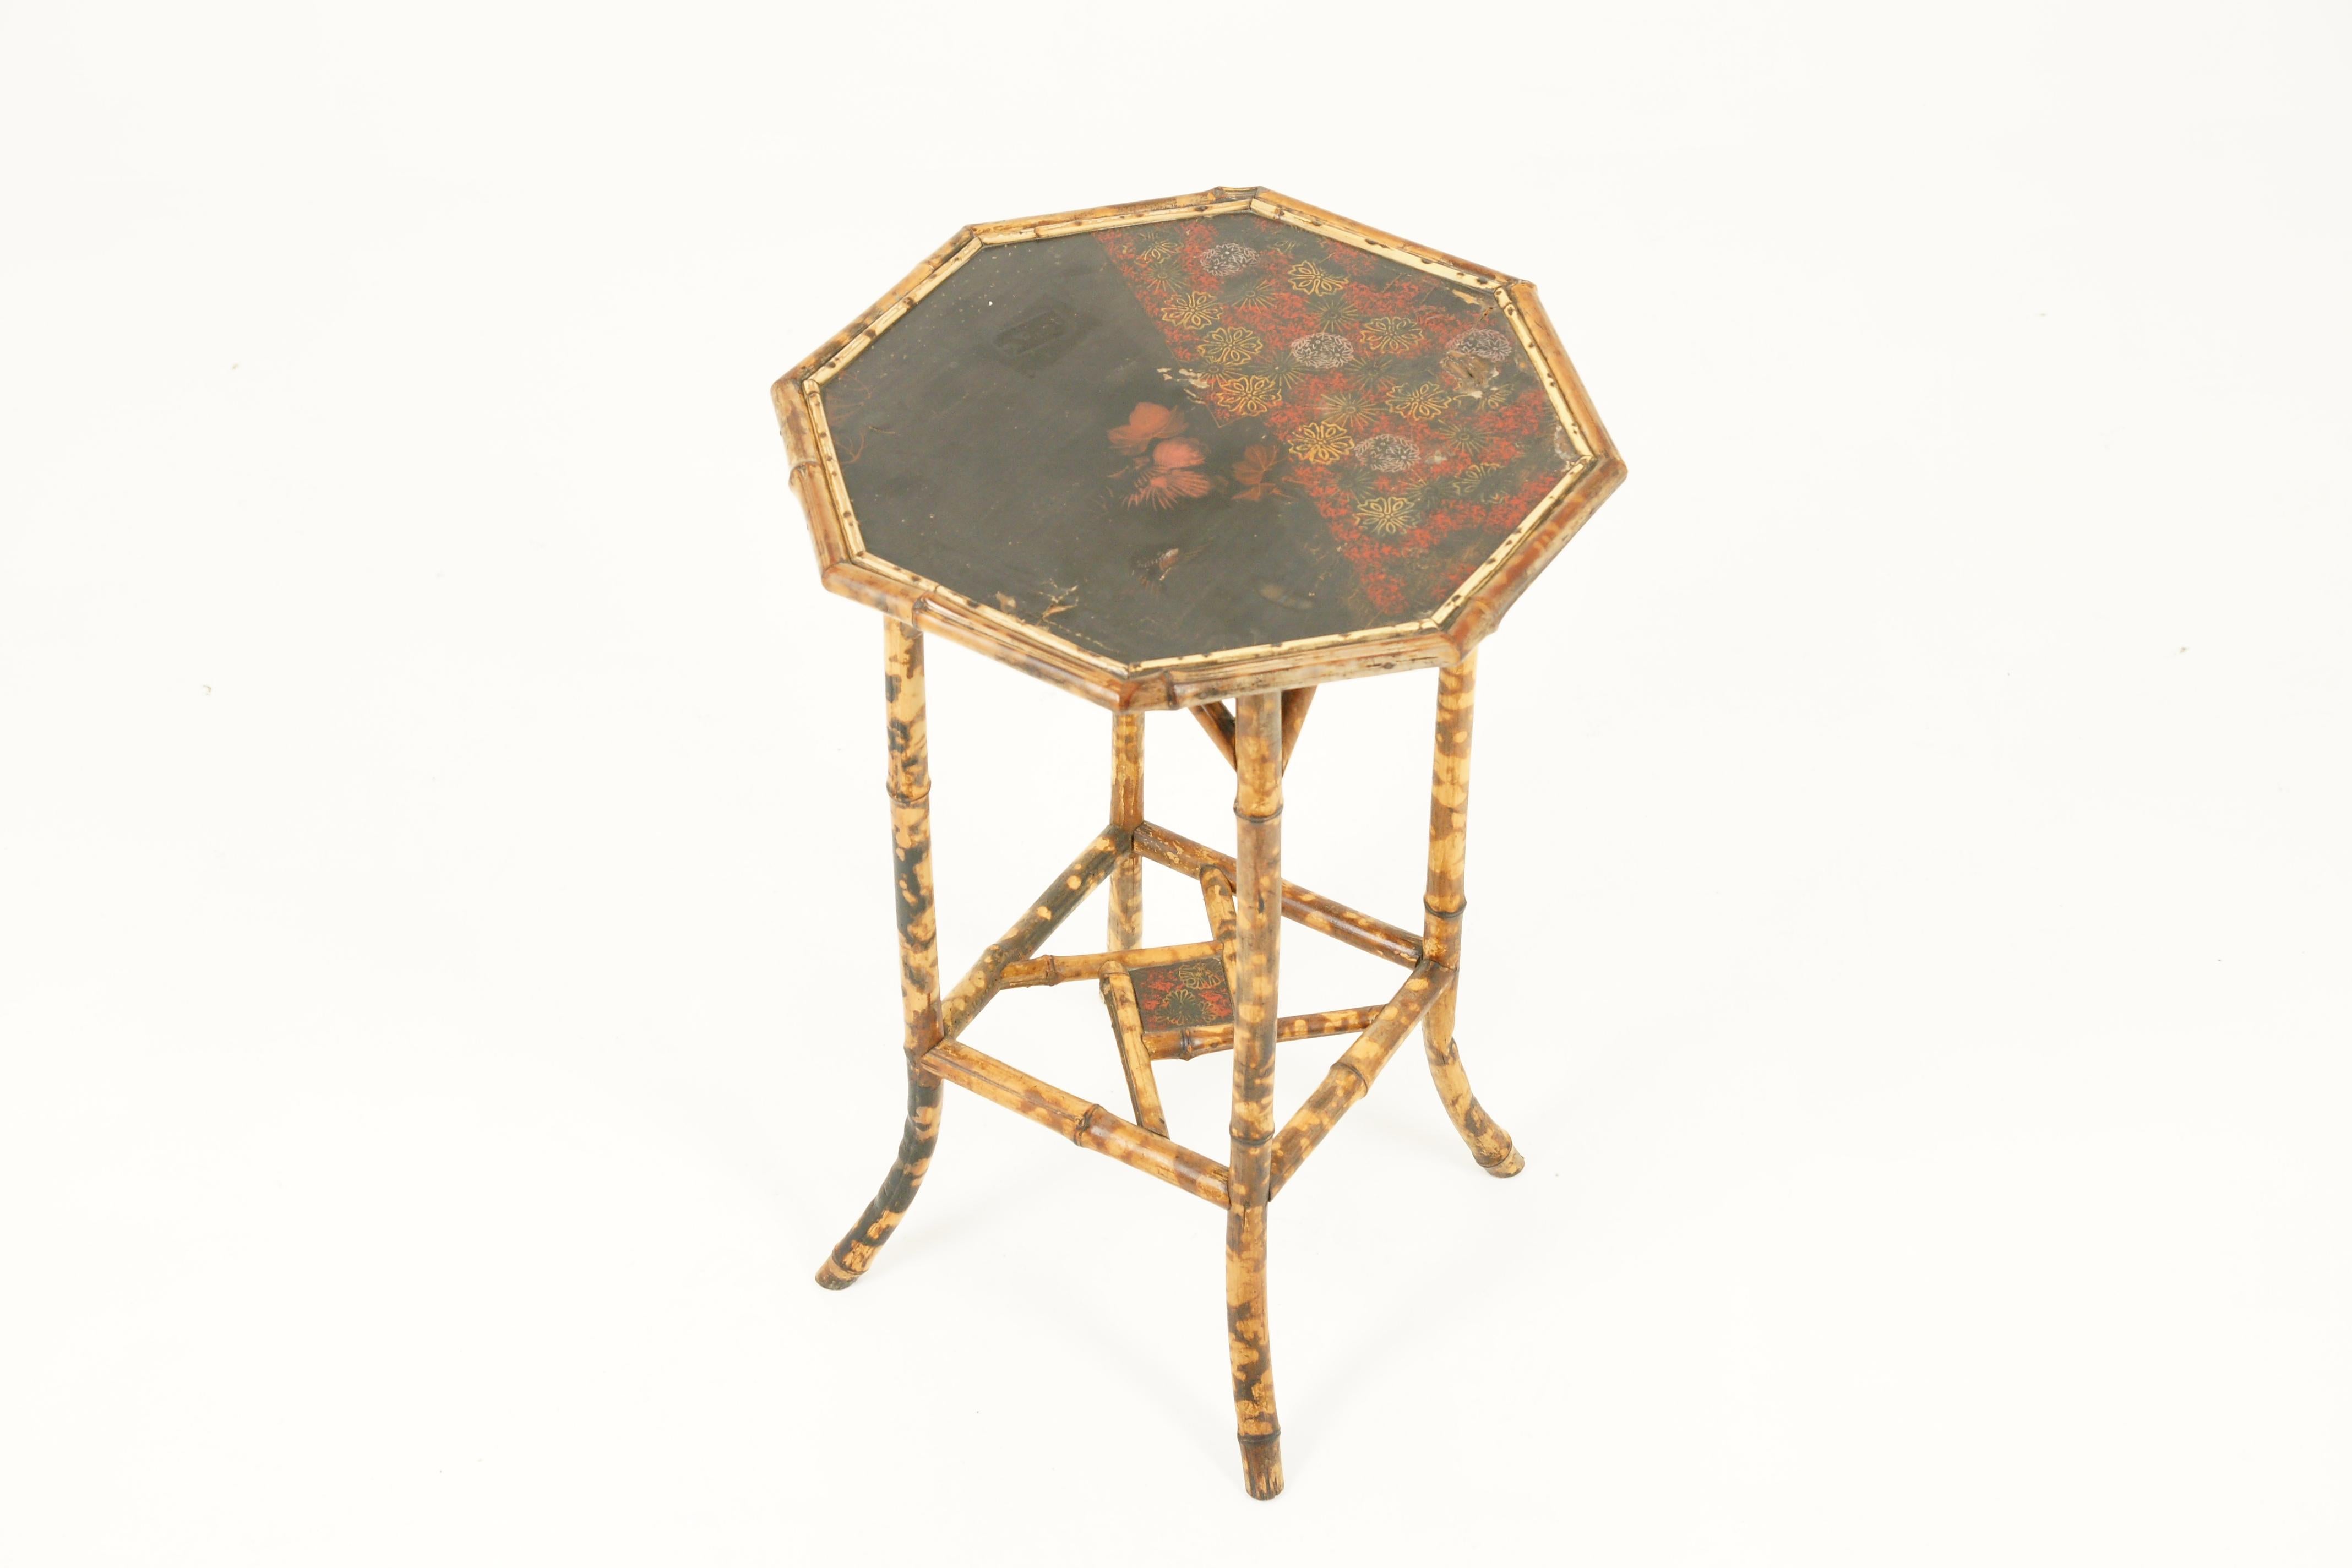 Antique Victorian octagonal two-tier bamboo lamp side table, Scotland 1870, Antique Furniture
Classic octagonal shape
Aged patina to the original top with foliage theme
Sitting on four shaped bamboo legs
Lower small lacquered shelf joined by